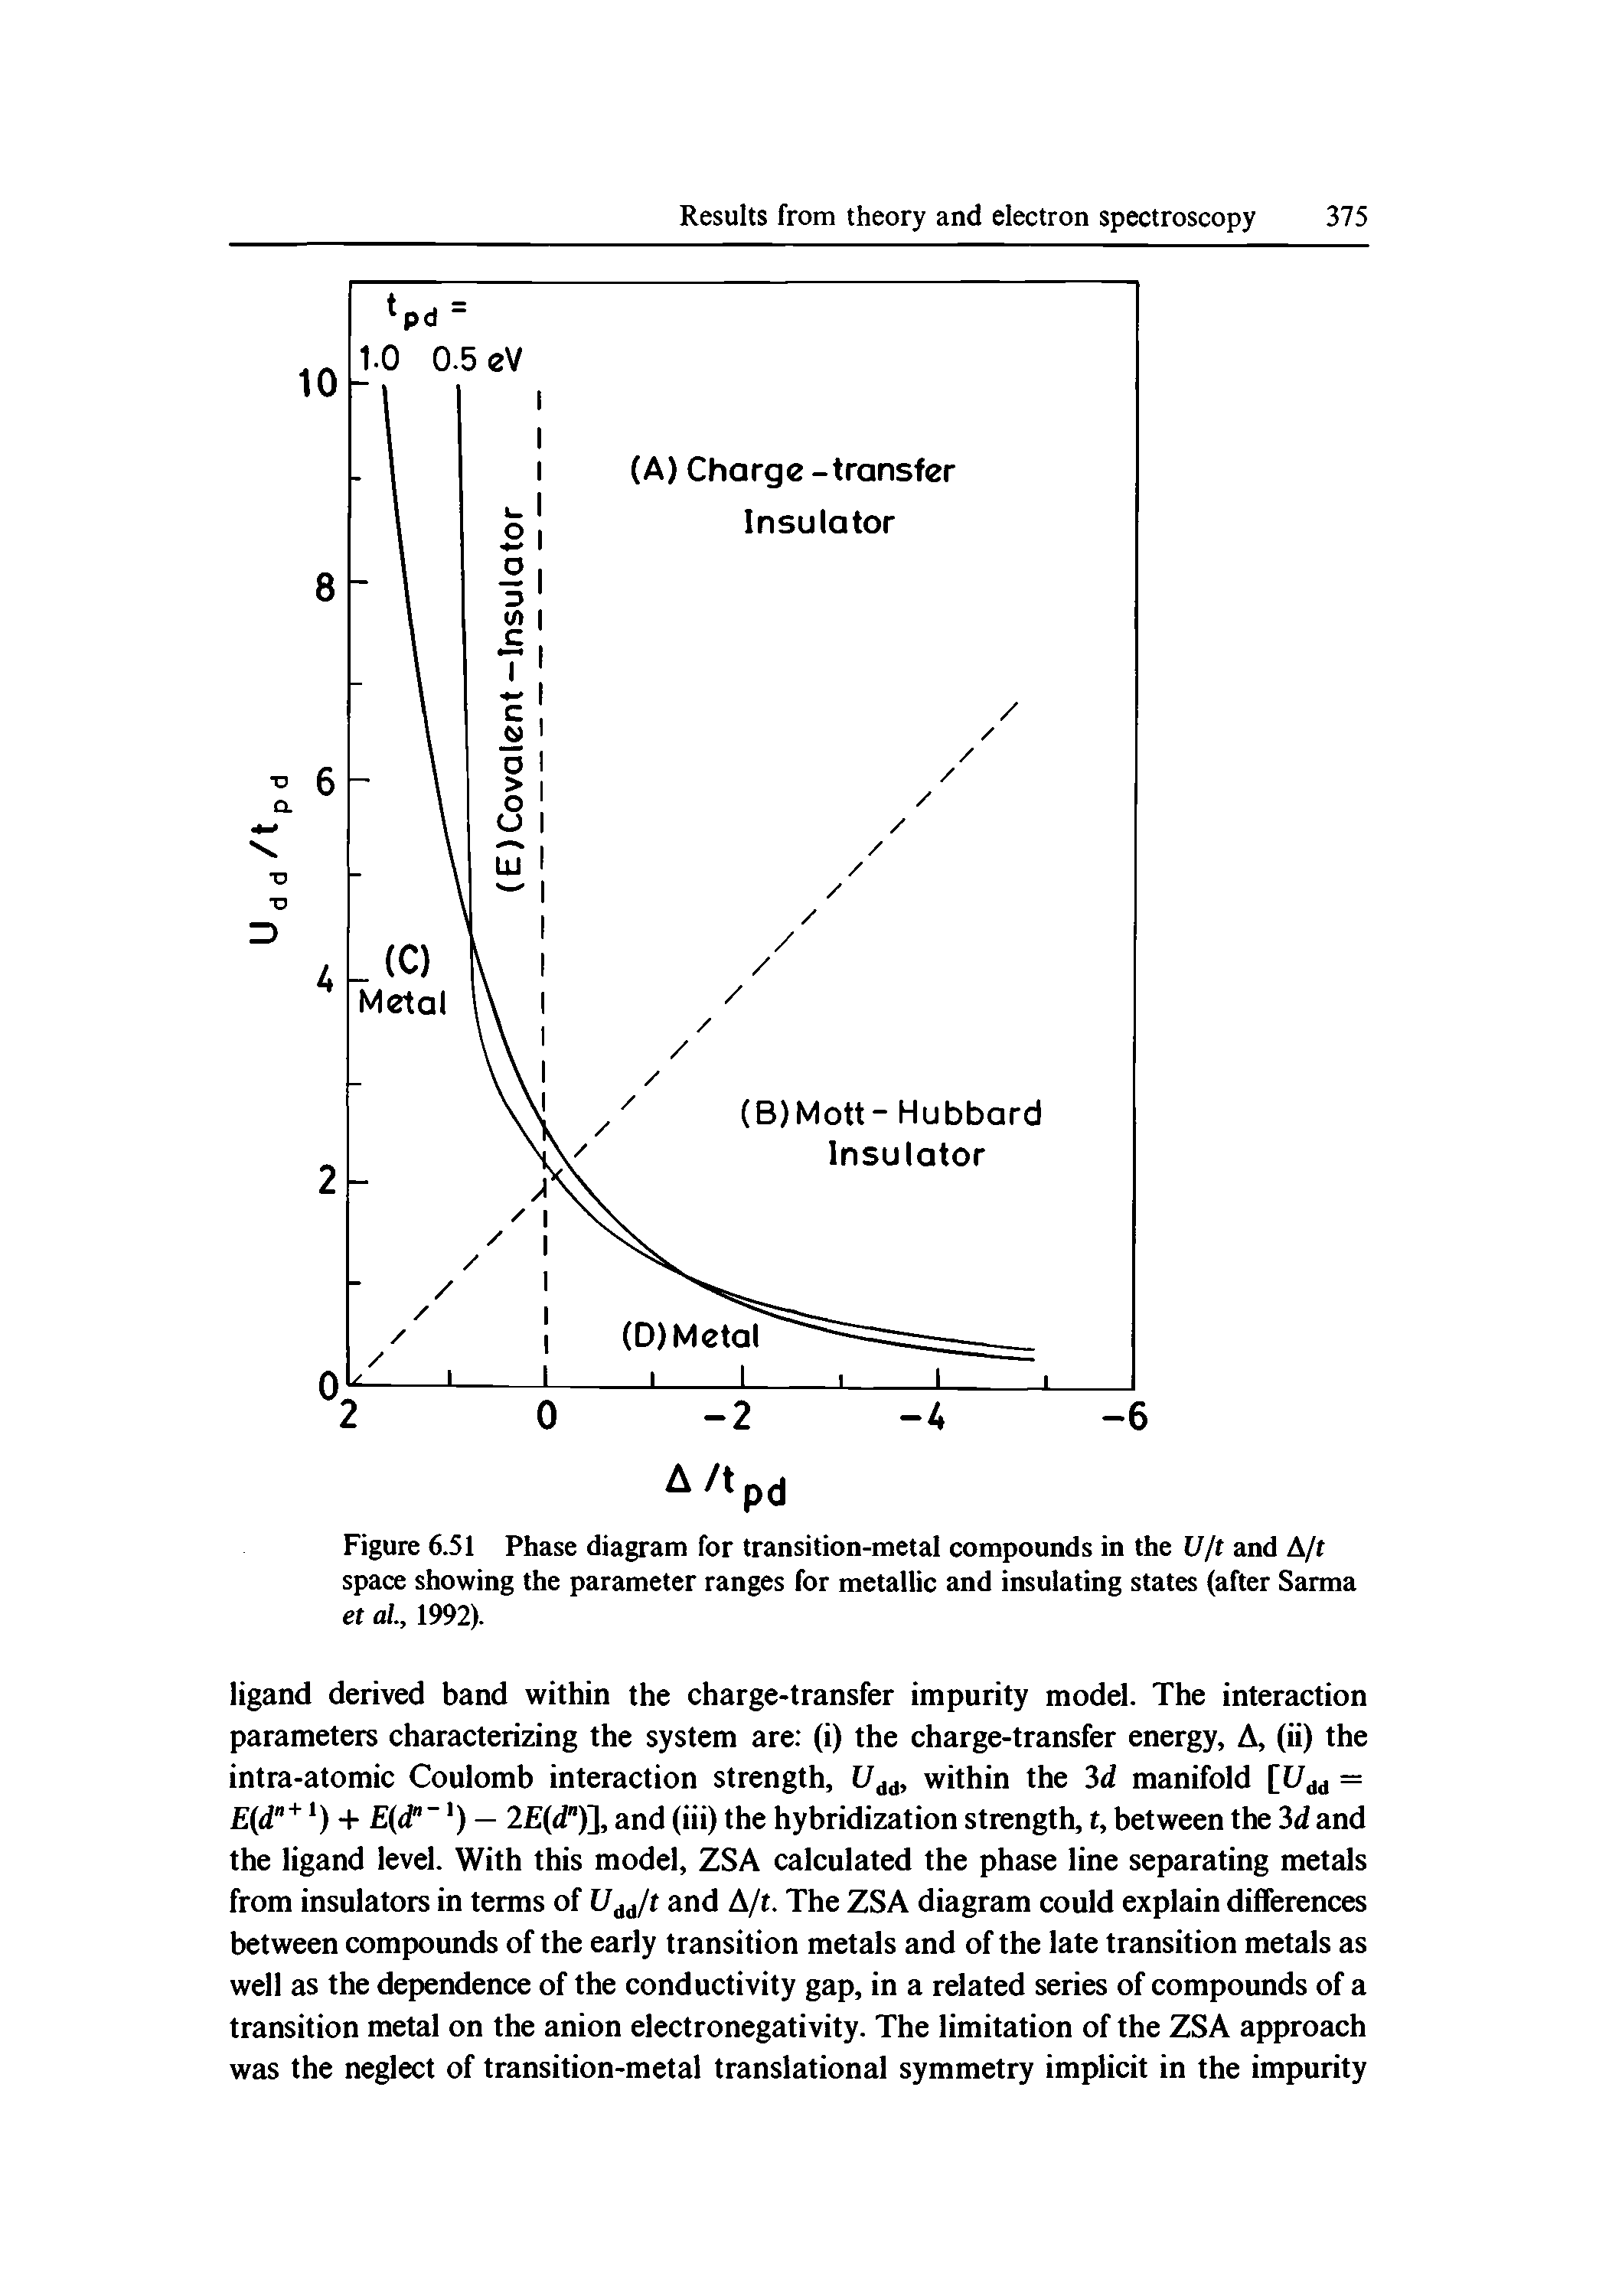 Figure 6.51 Phase diagram for transition-metal compounds in the f//t and A/t space showing the parameter ranges for metallic and insulating states (after Sarma et al., 1992).